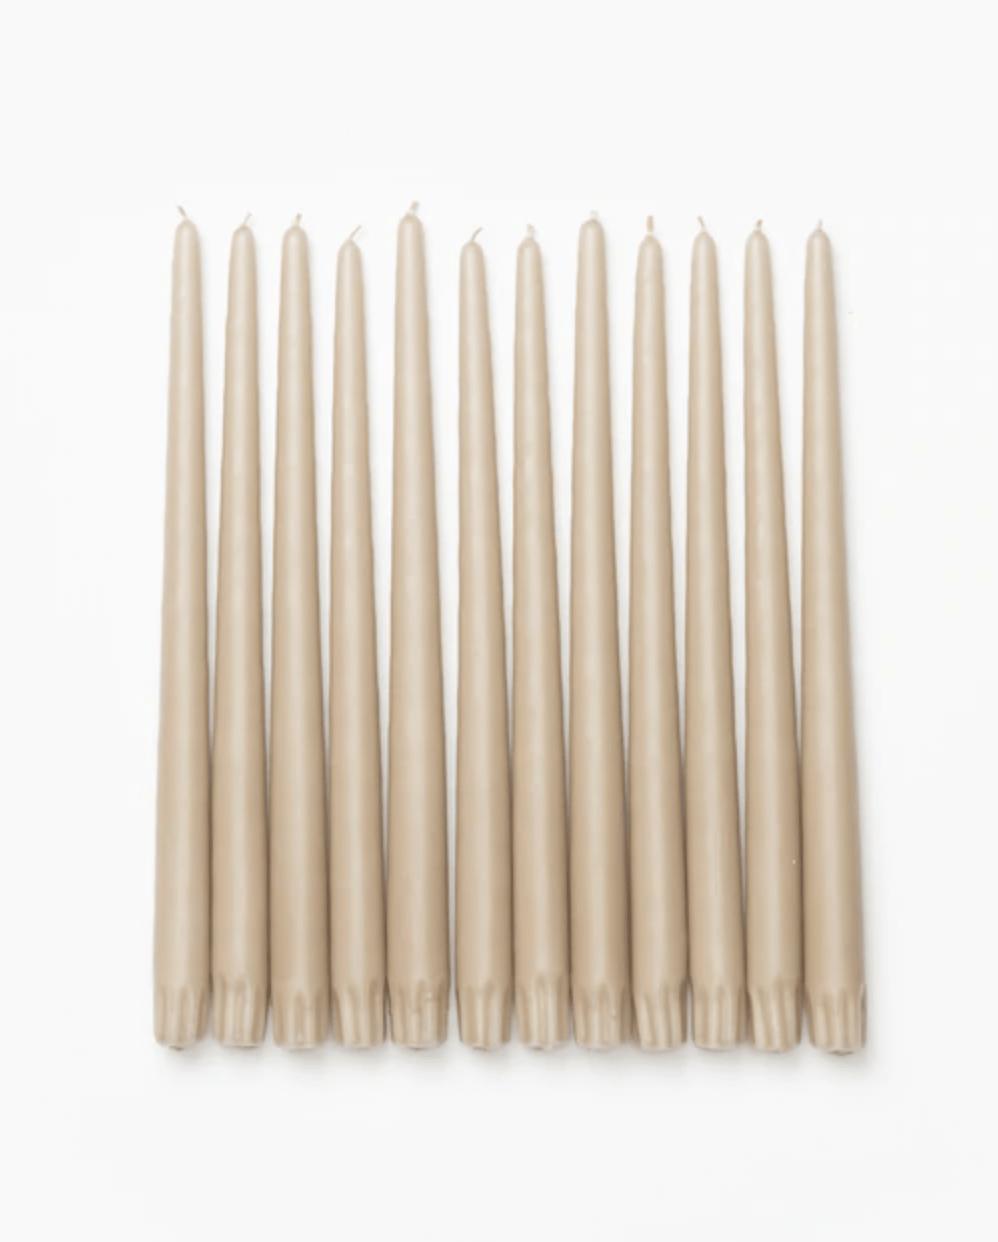 12 sand-colored taper candles